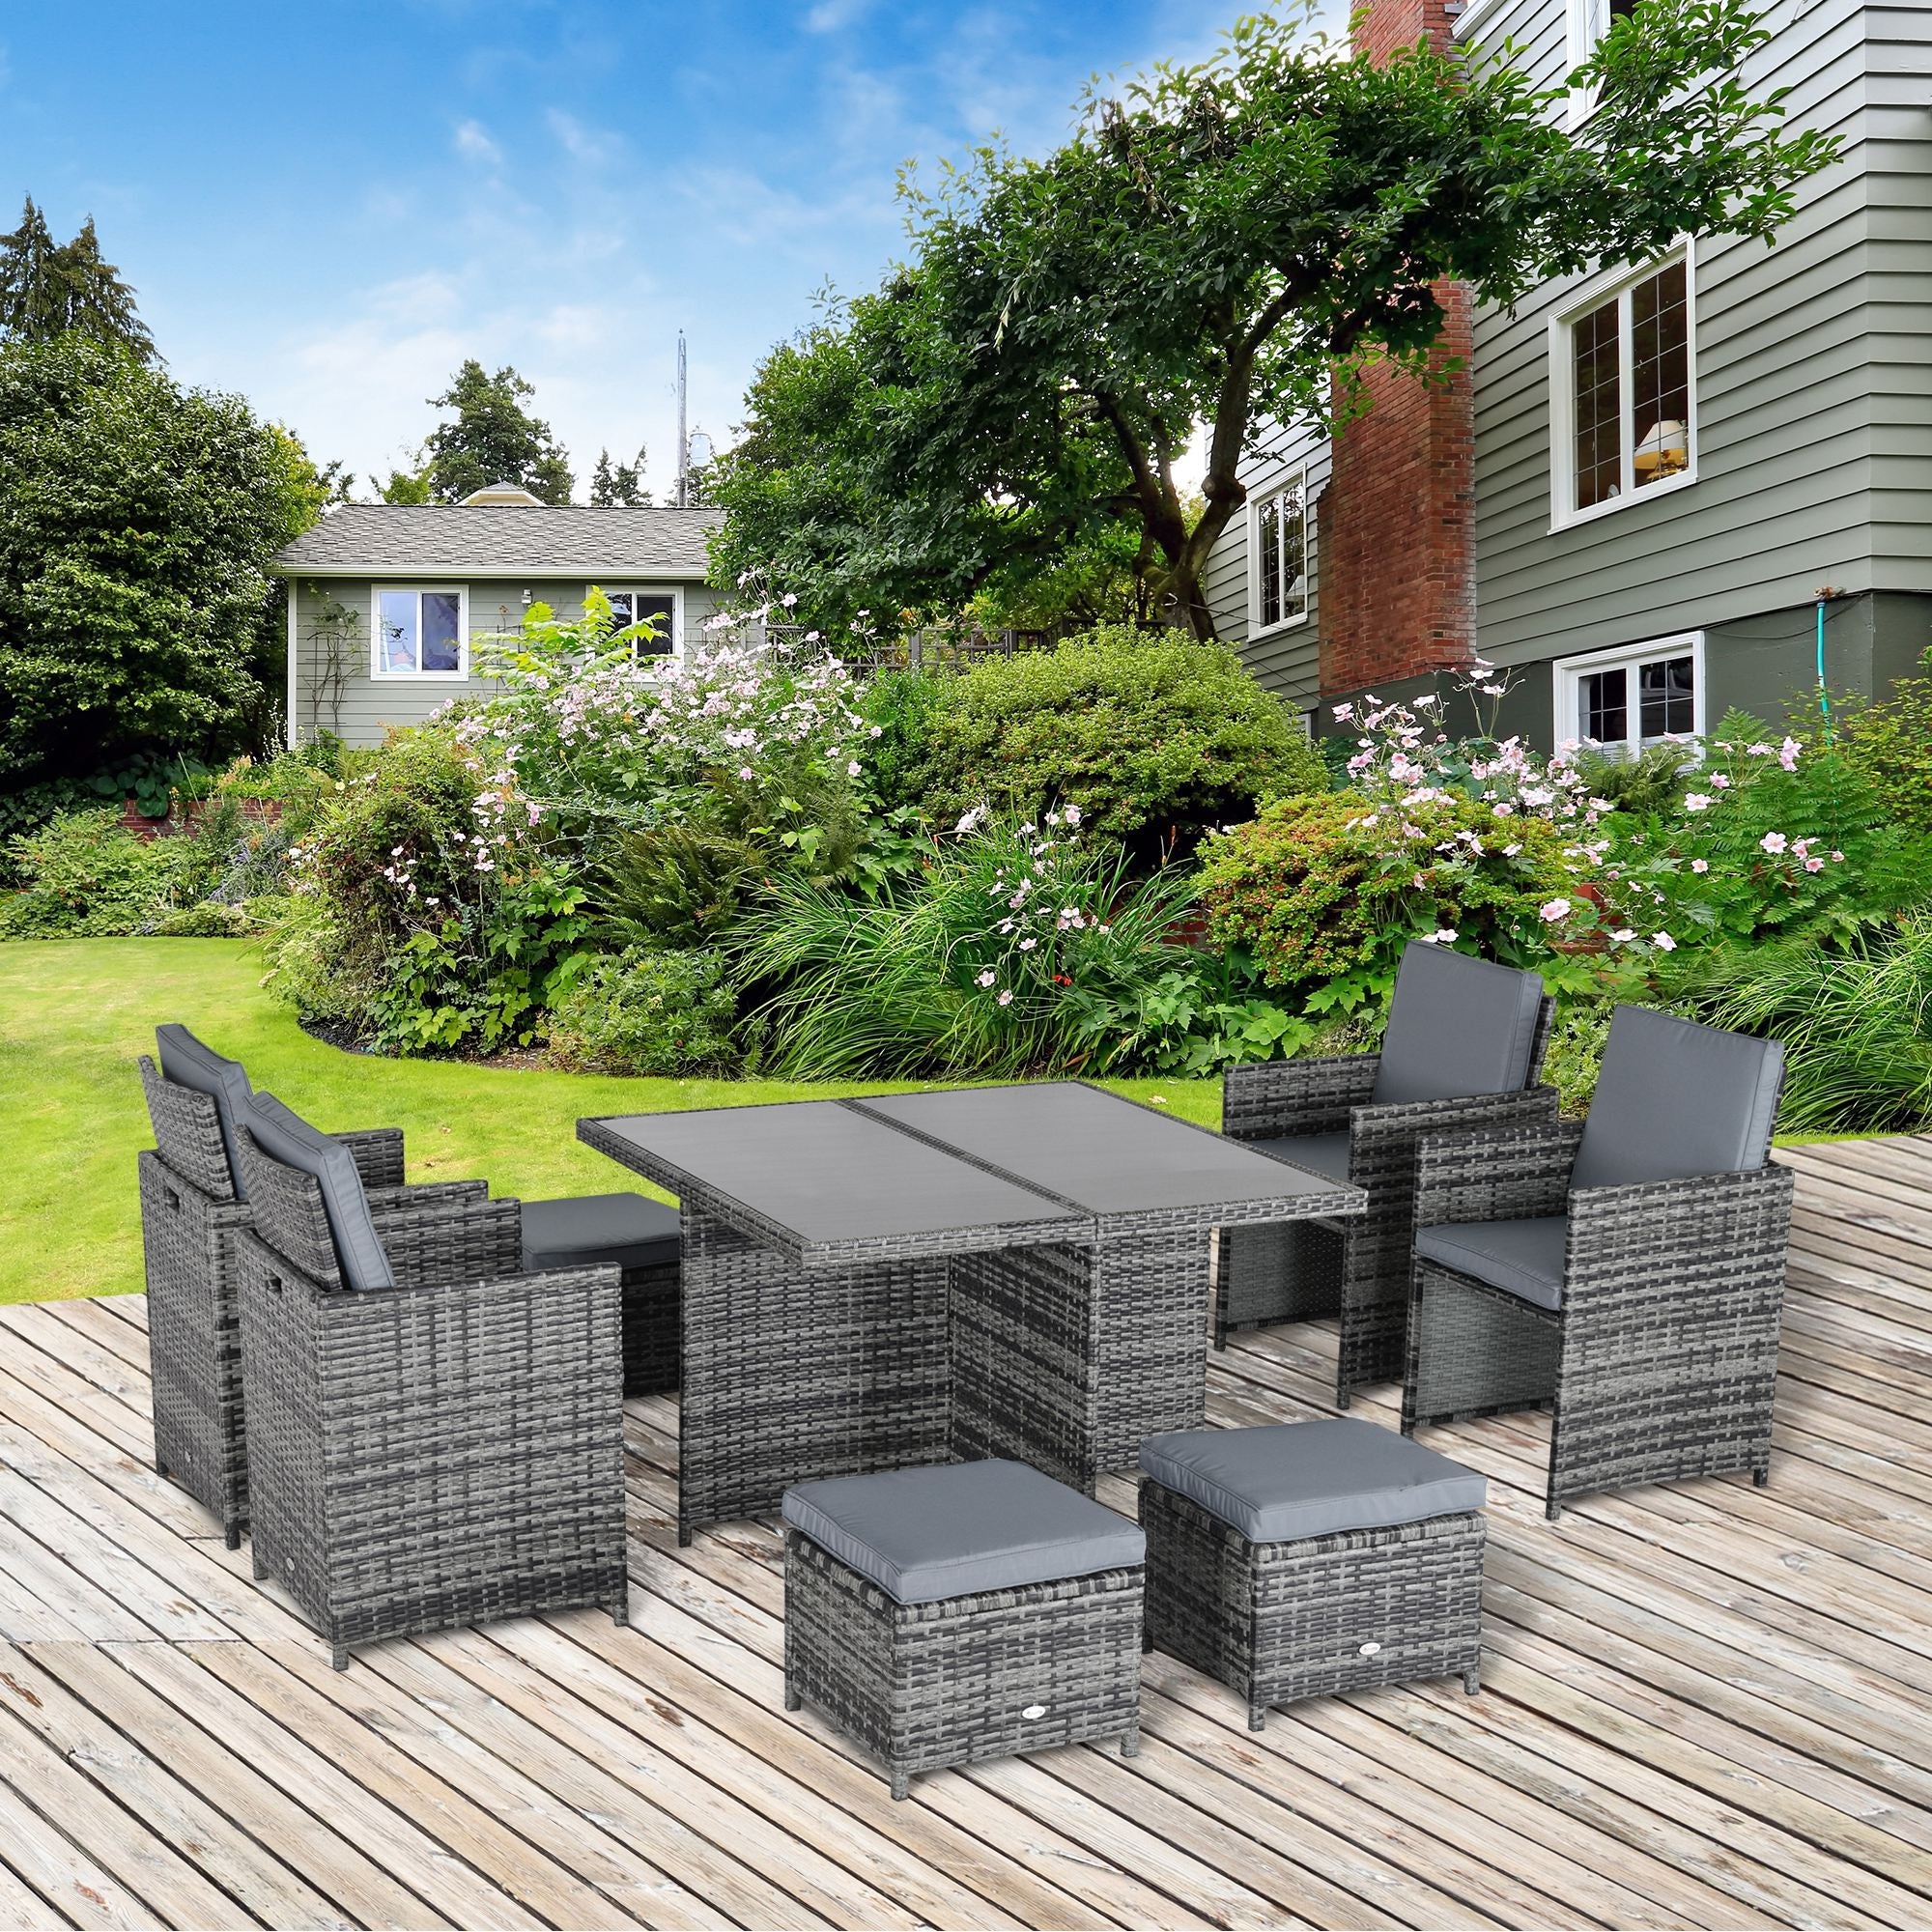 9PC Rattan Dining Set Garden Furniture 8-seater Wicker Outdoor Dining Set Chairs + Footrest + Table Thick Cushion - Grey-0